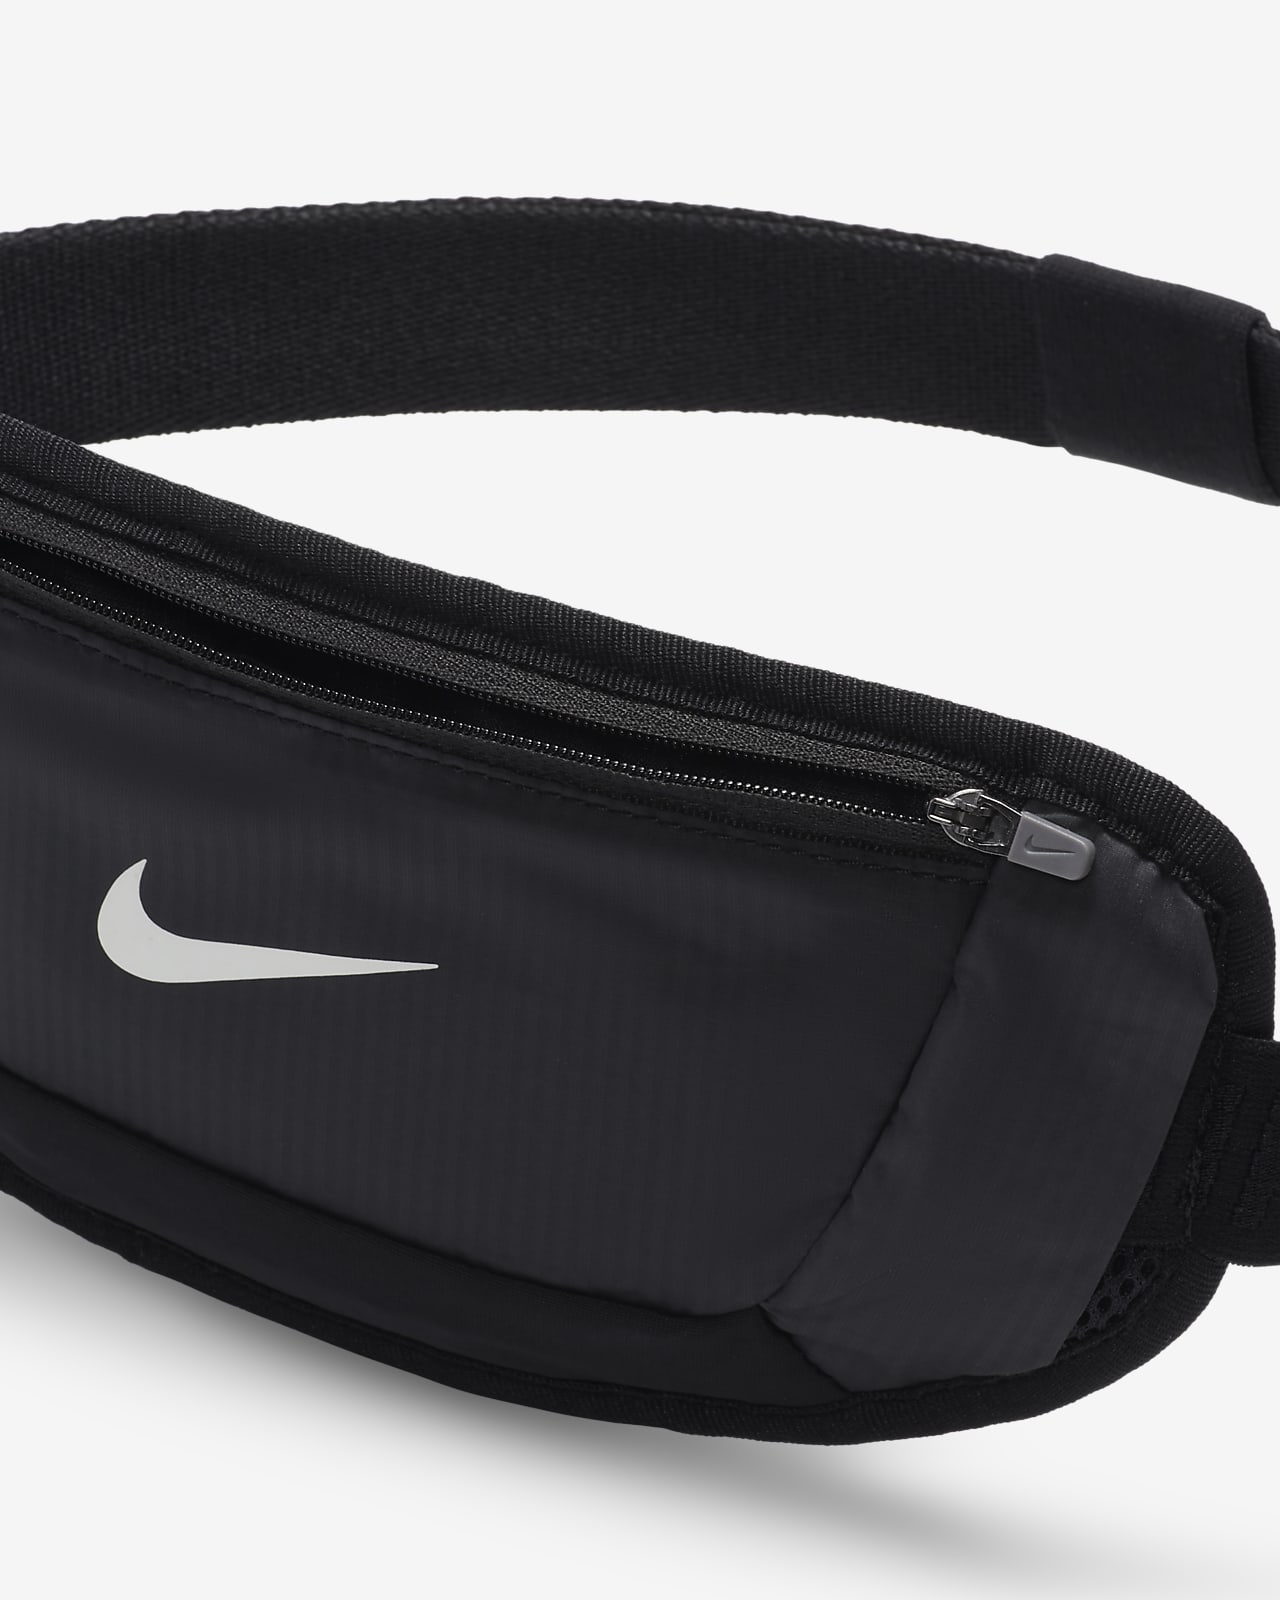 Nike Challenger 2 Running Fanny Pack (Small, 500 mL).